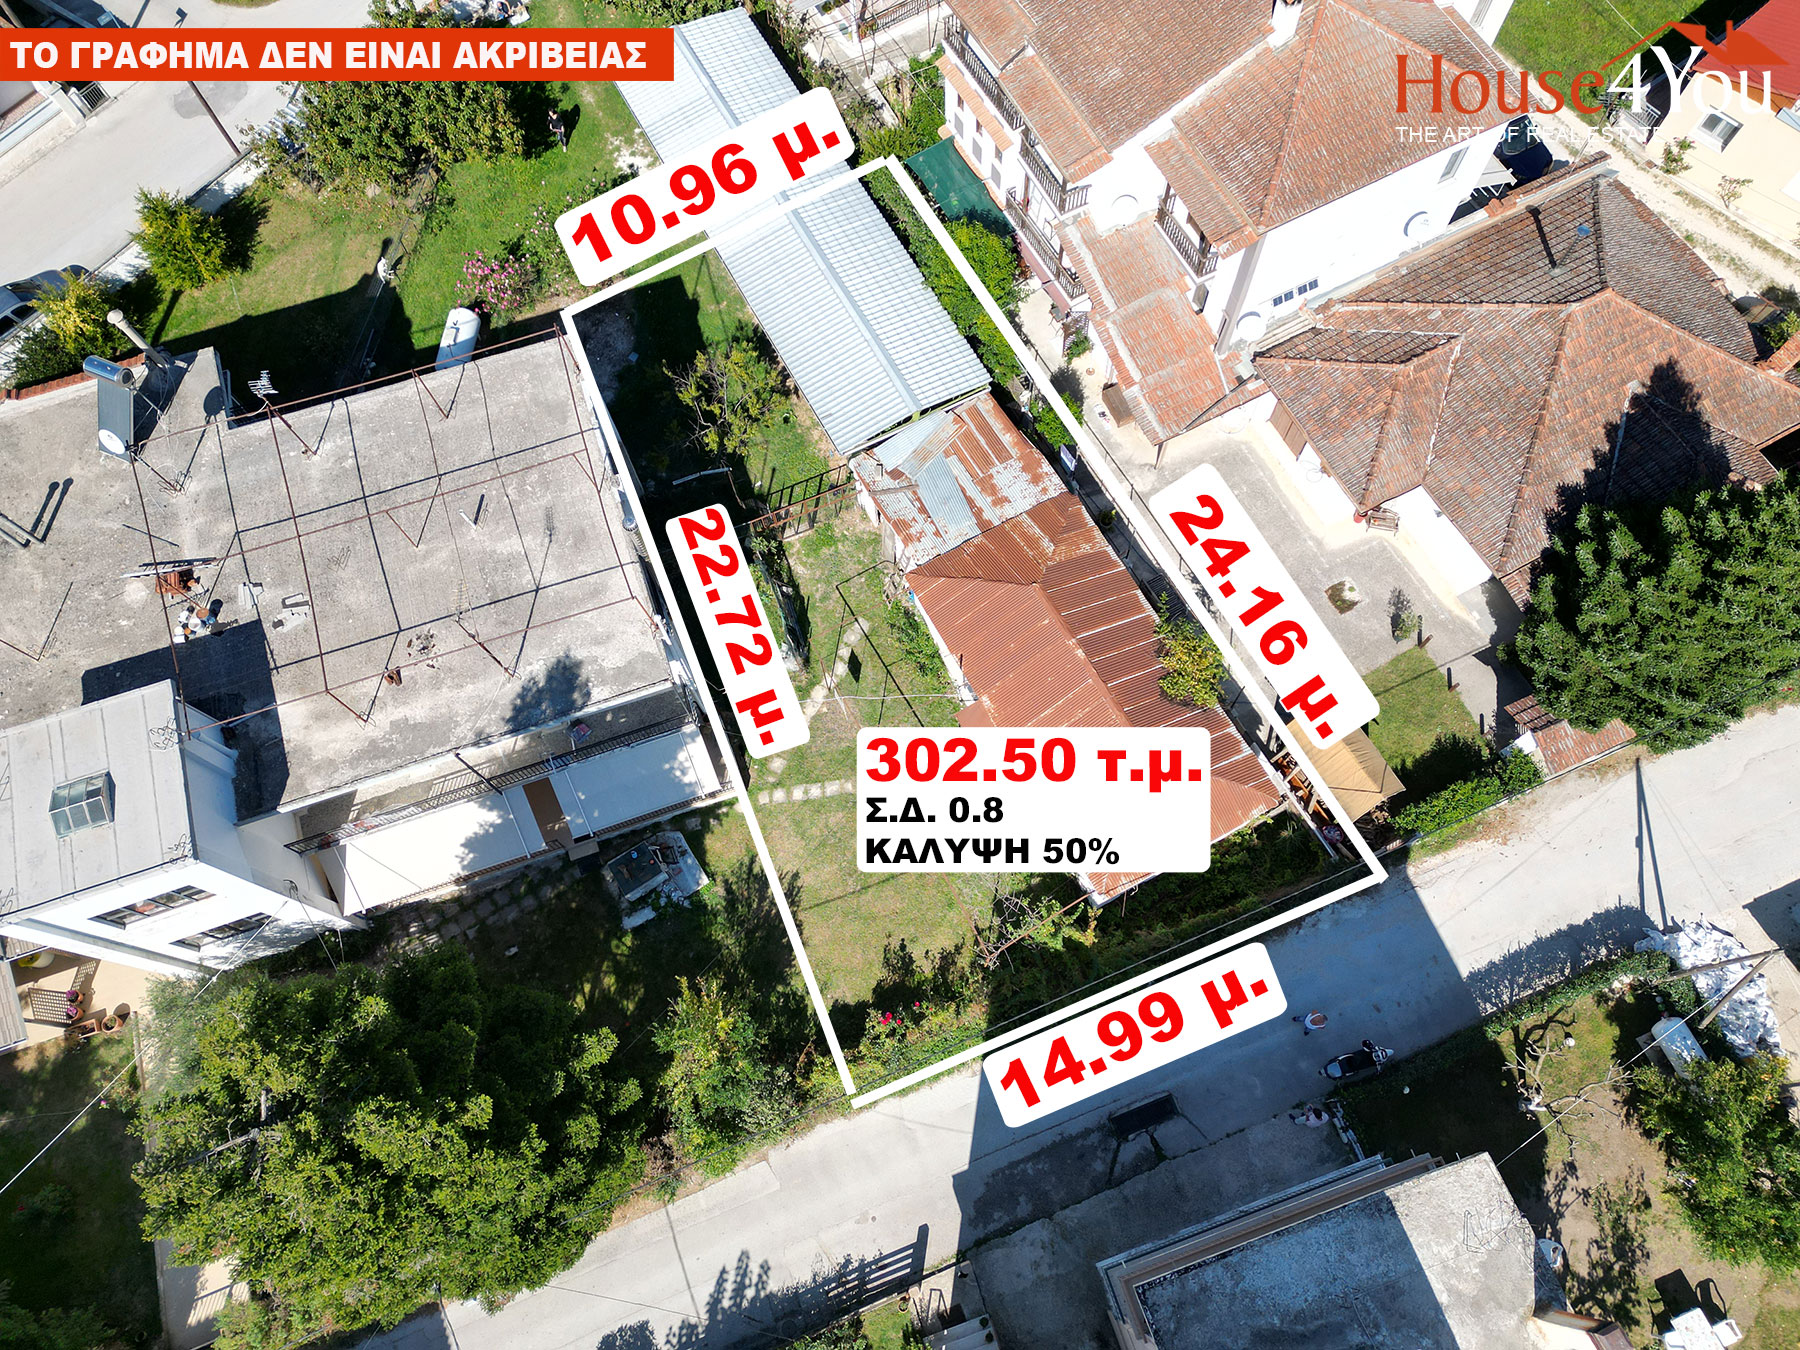 Plot for sale 302.50 sq.m. with S.D. 0.8 in the center of Katsika in Ioannina